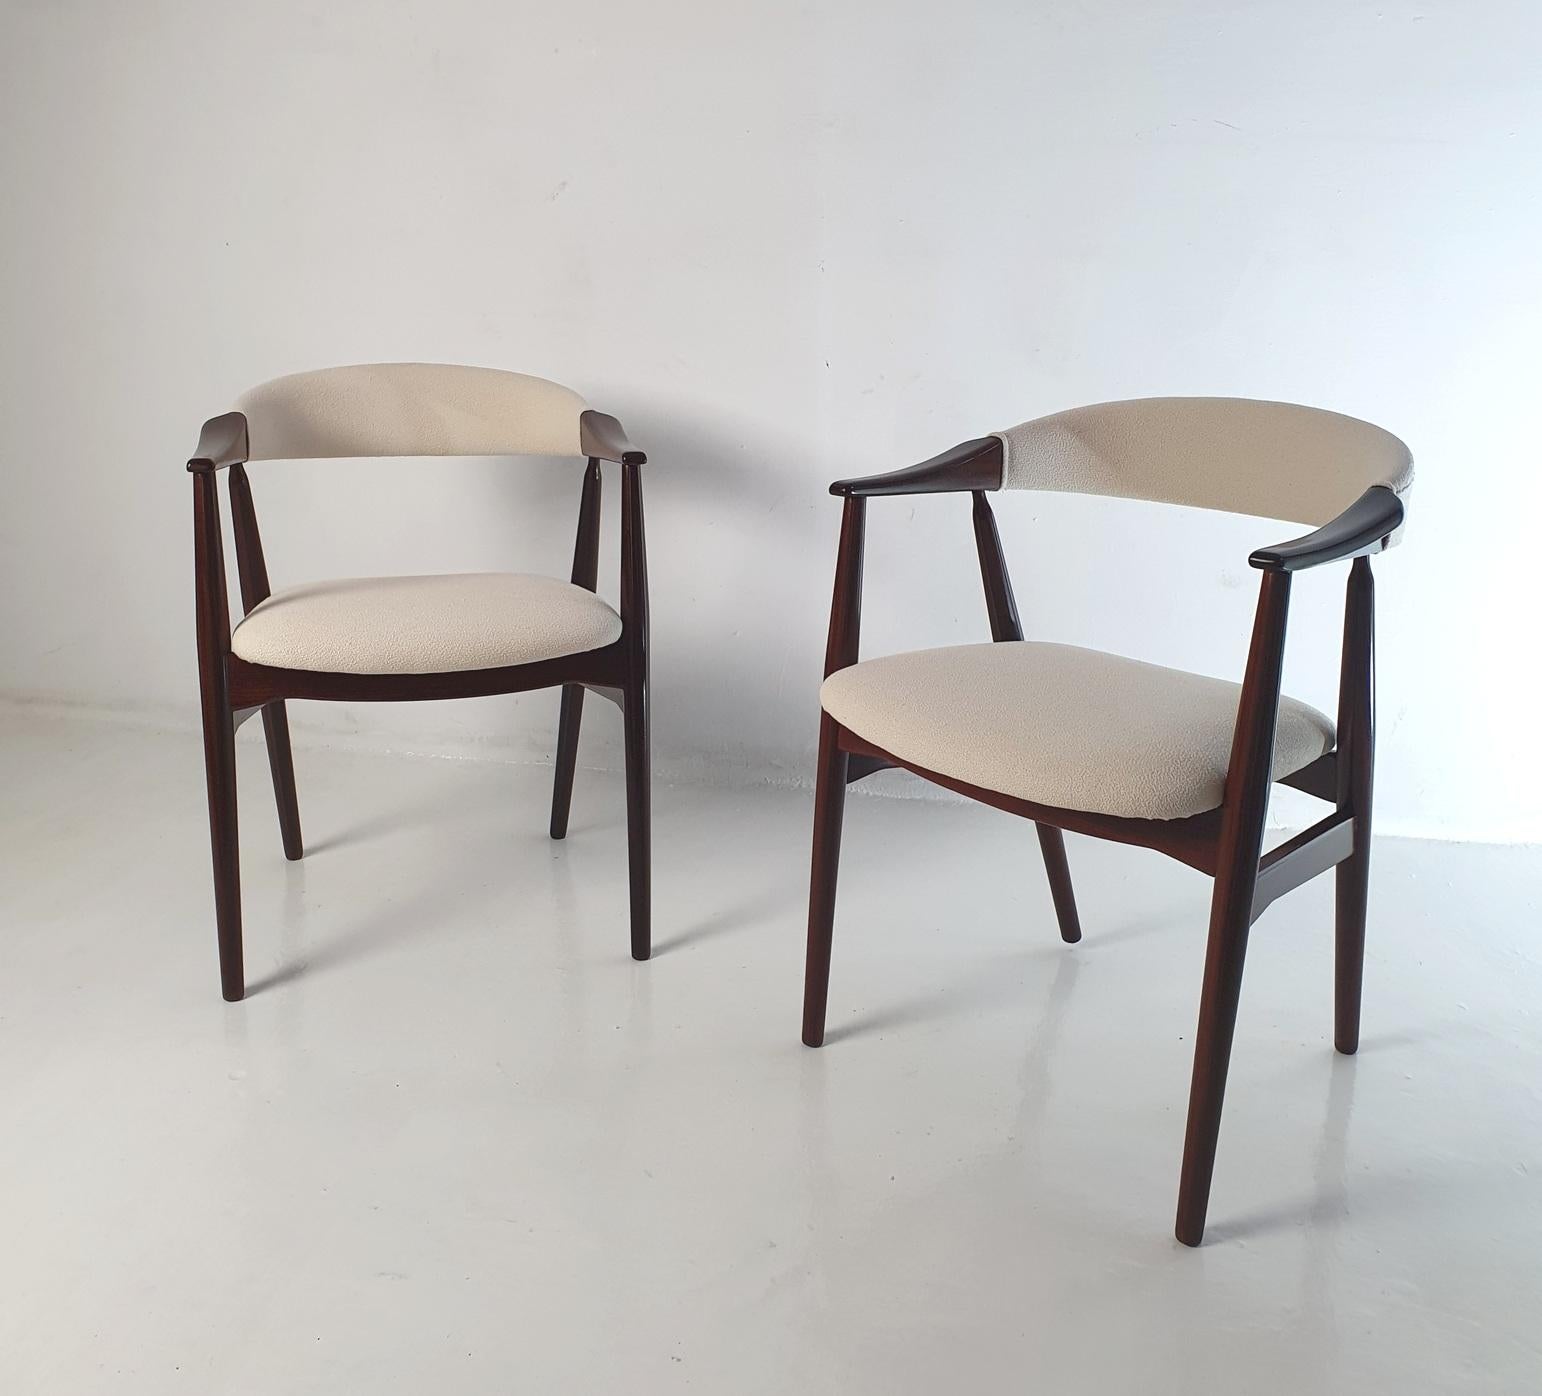 Step into the world of midcentury design with this stunning pair of Model 213 dining chairs by the renowned Danish designer Thomas Harlev for Farstrup Mobler. These chairs are a true embodiment of the era's sleek and elegant aesthetic, making them